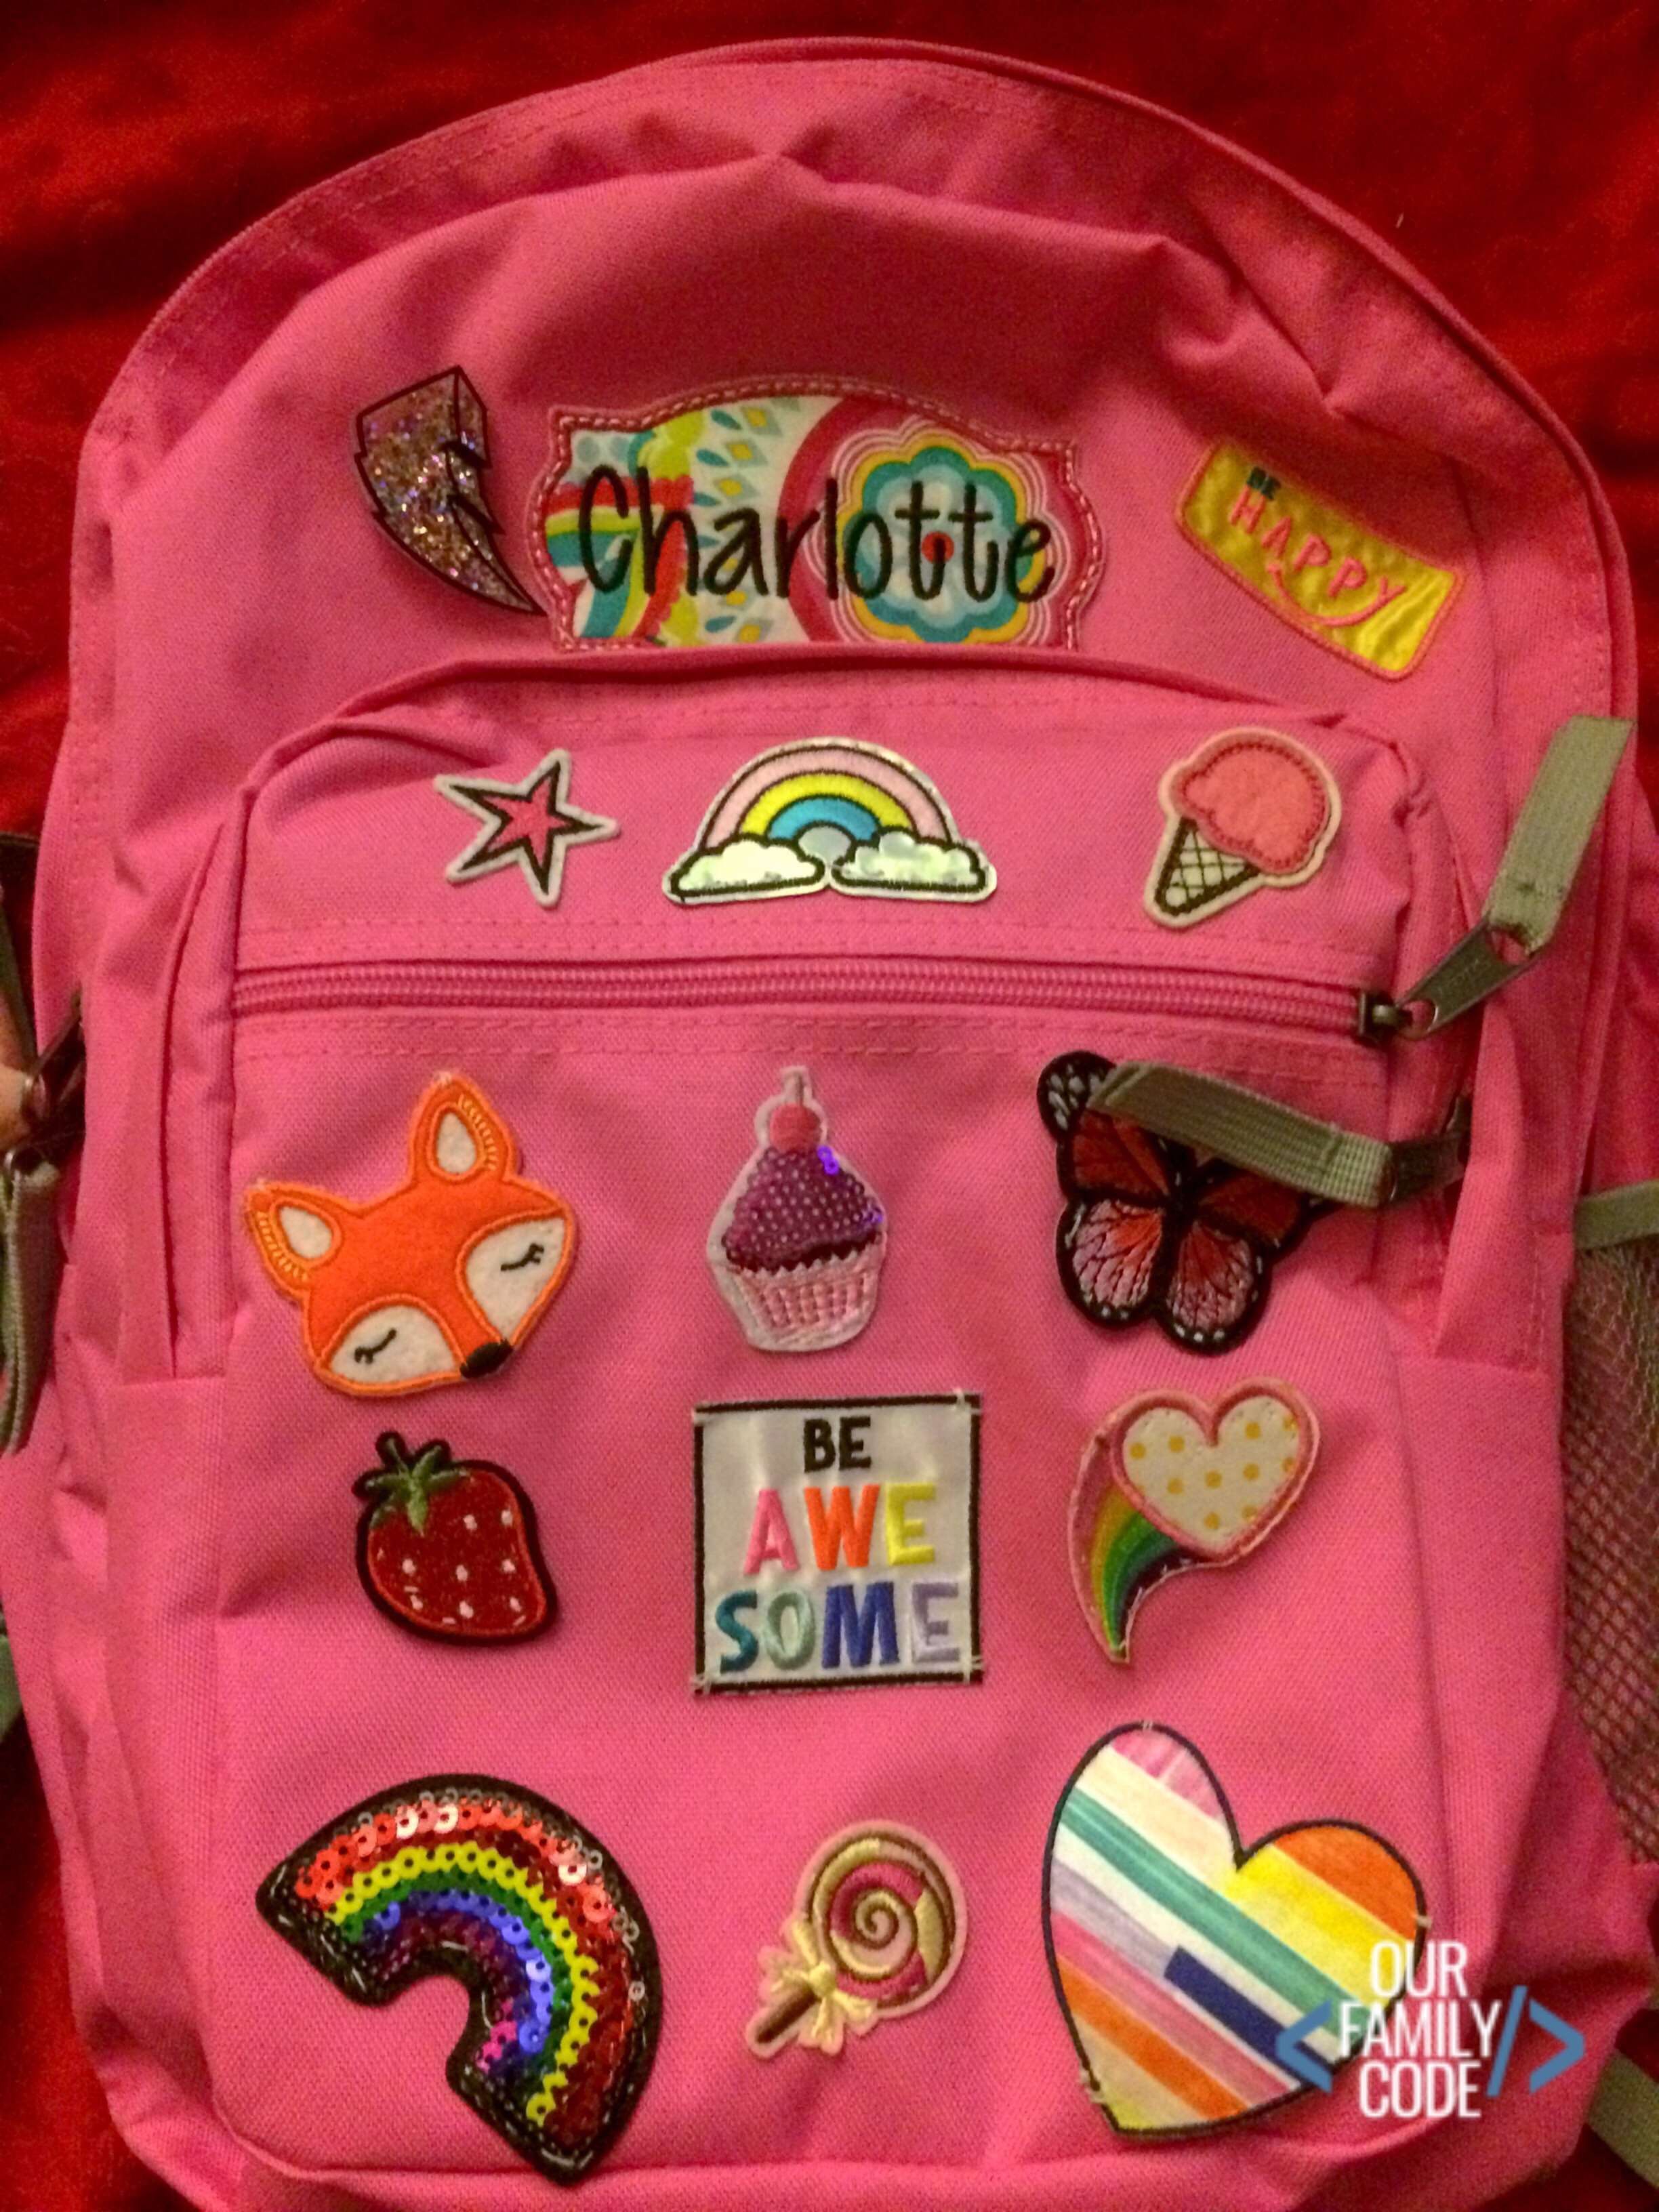 Neon Pink Jansport Backpack with Patches